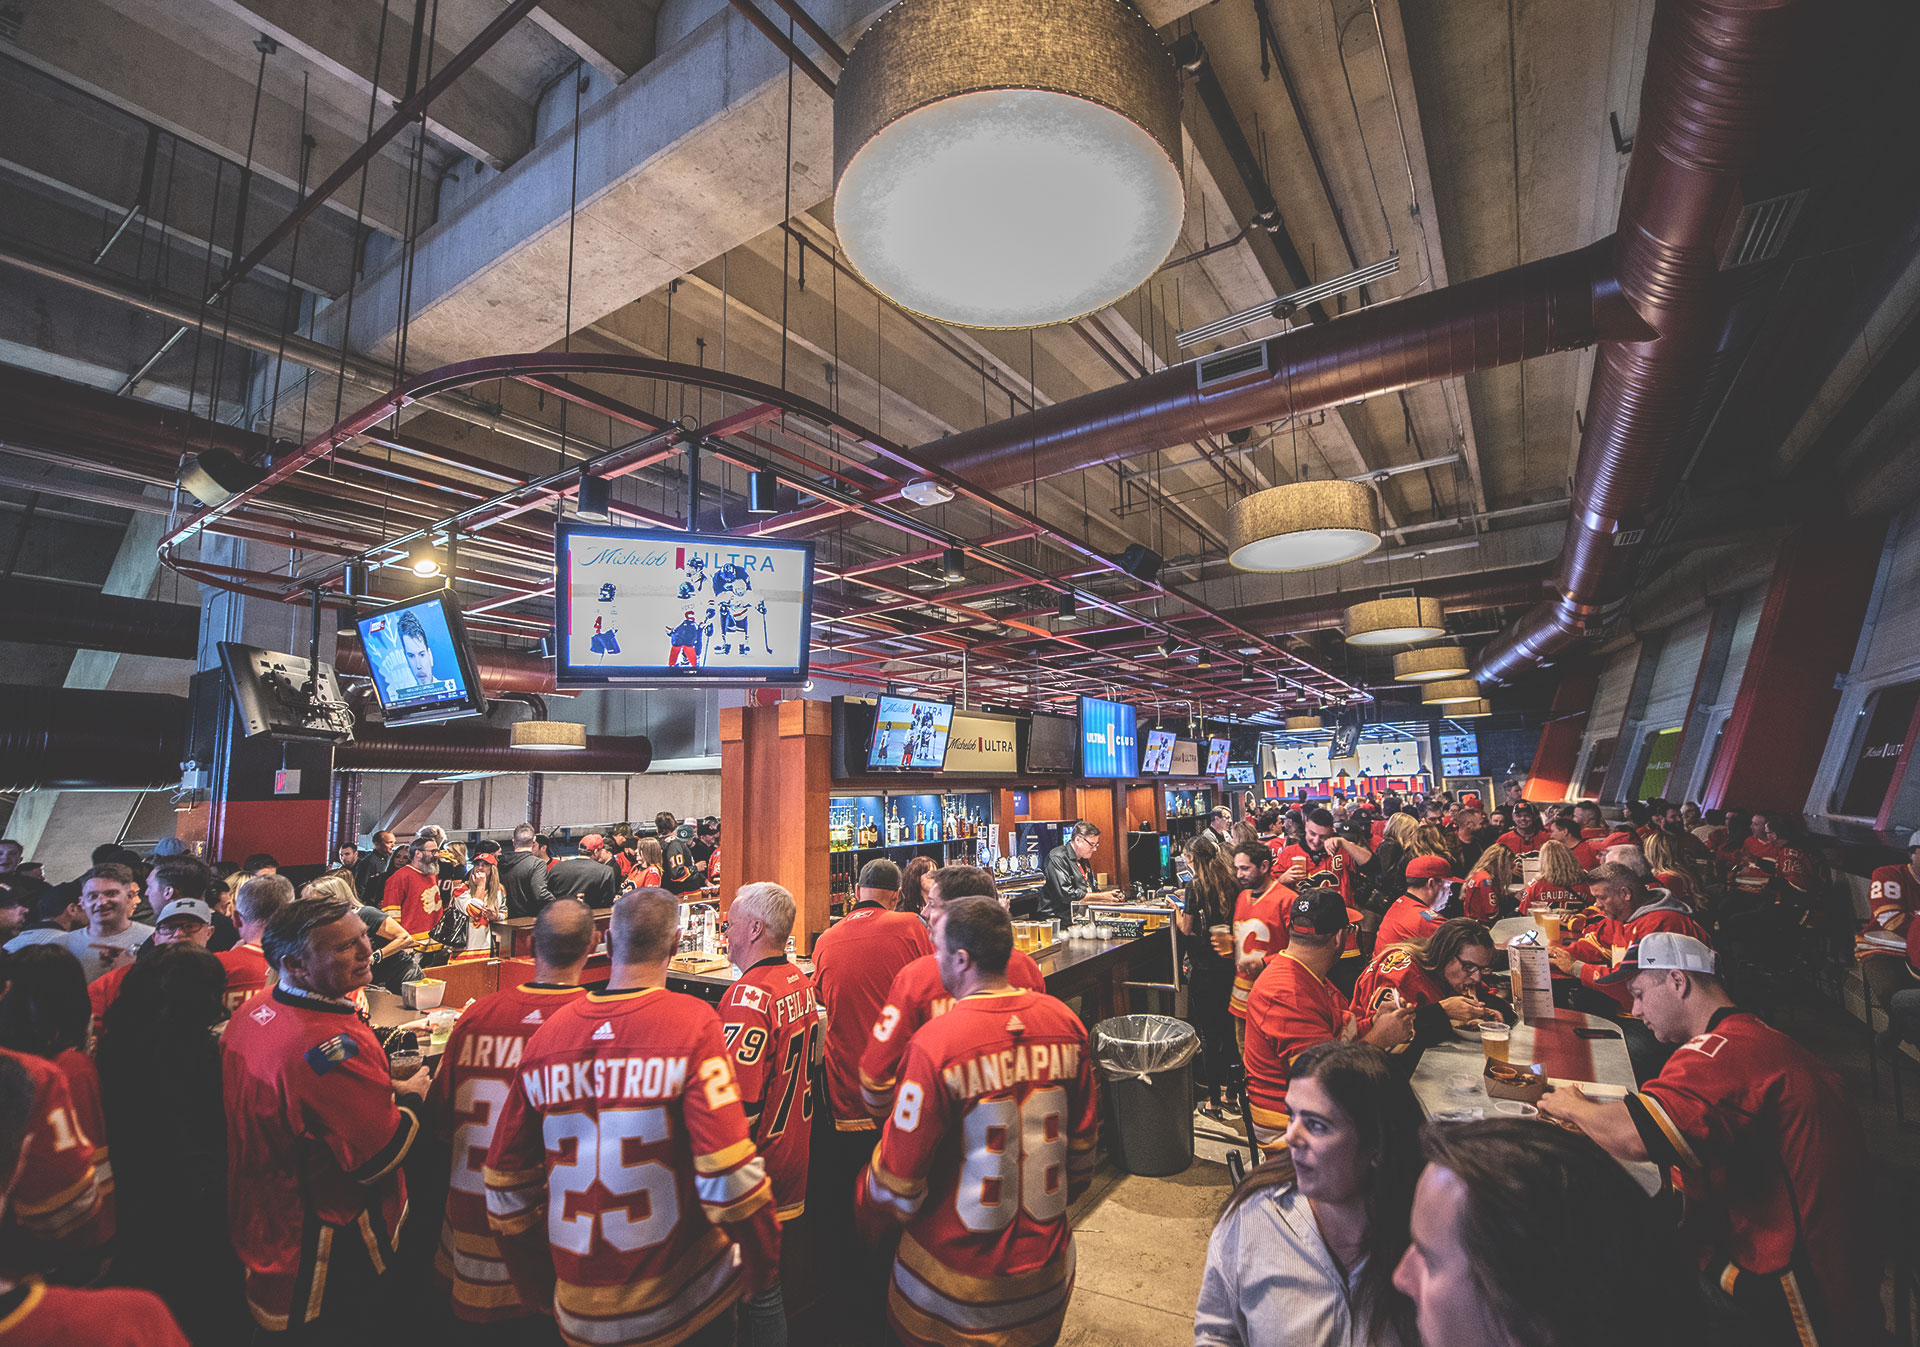 Calgary Flames Fans at the Scotiabank Saddledome